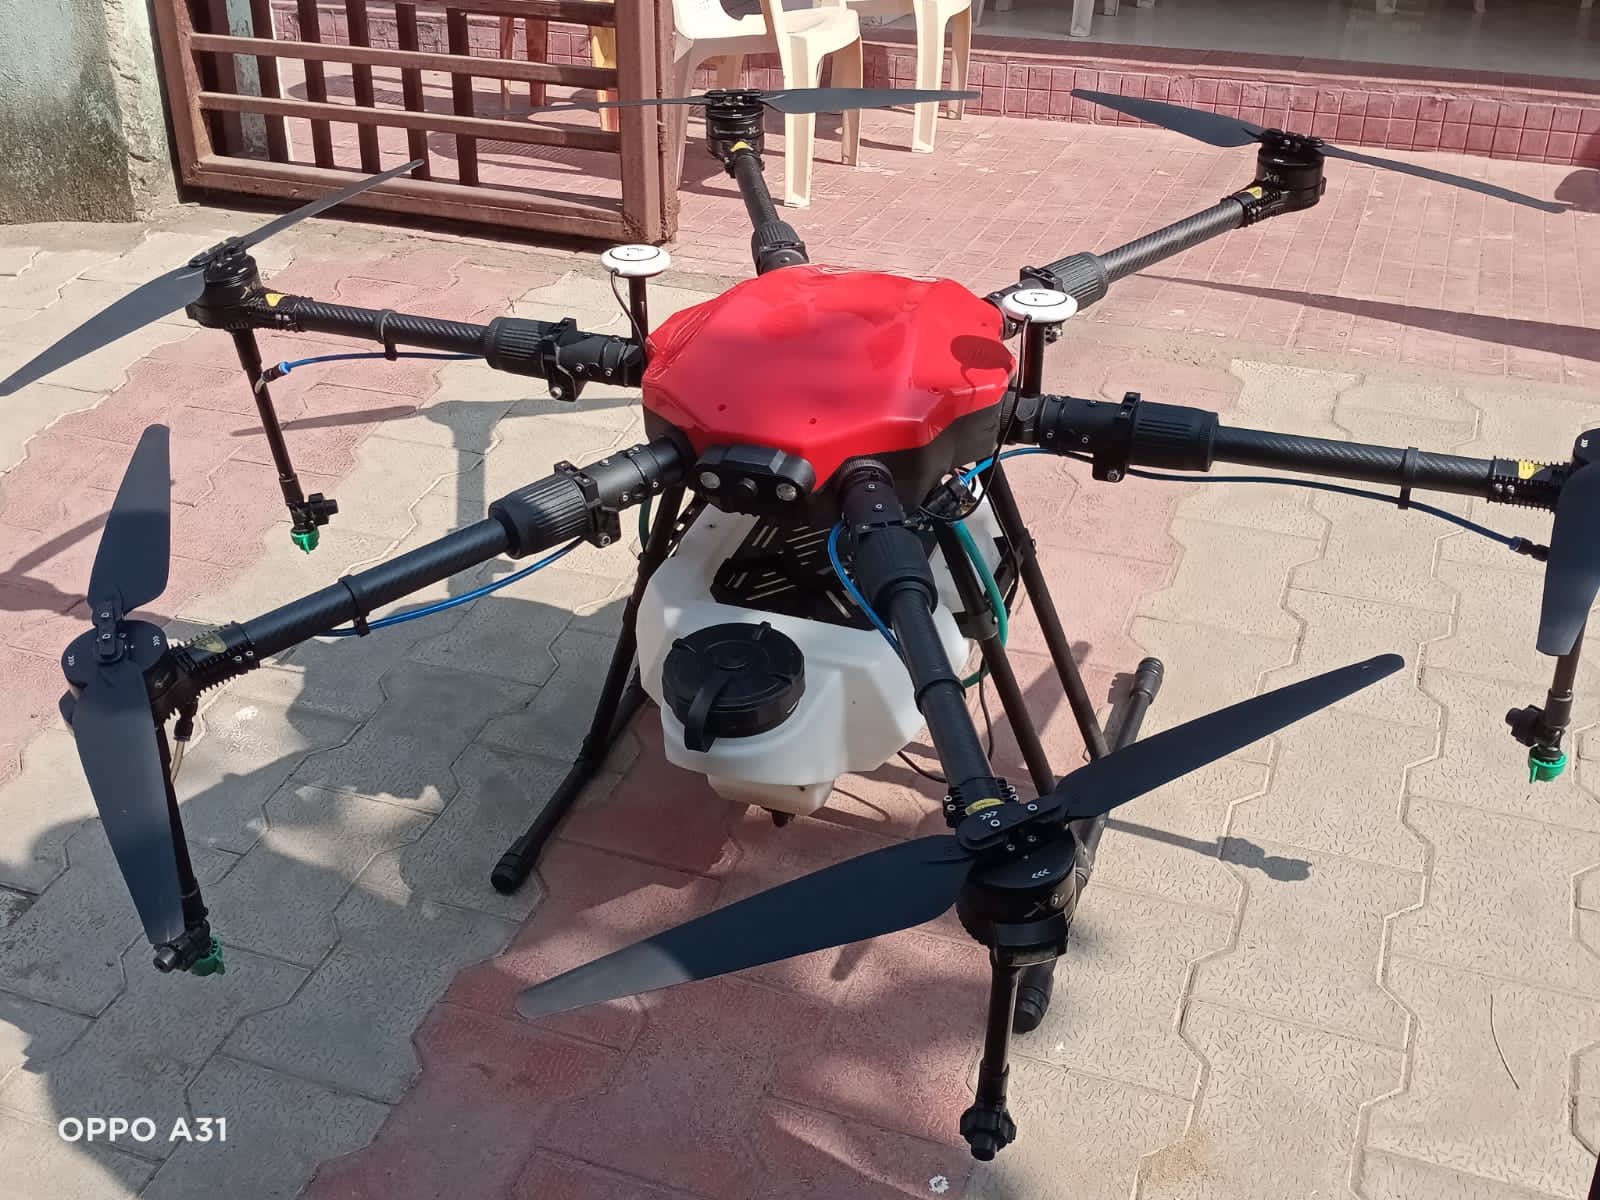 Bhubaneswar Municipal Corporation (BMC) introduces chemical spray using drones to deal with mosquito menace in the city.